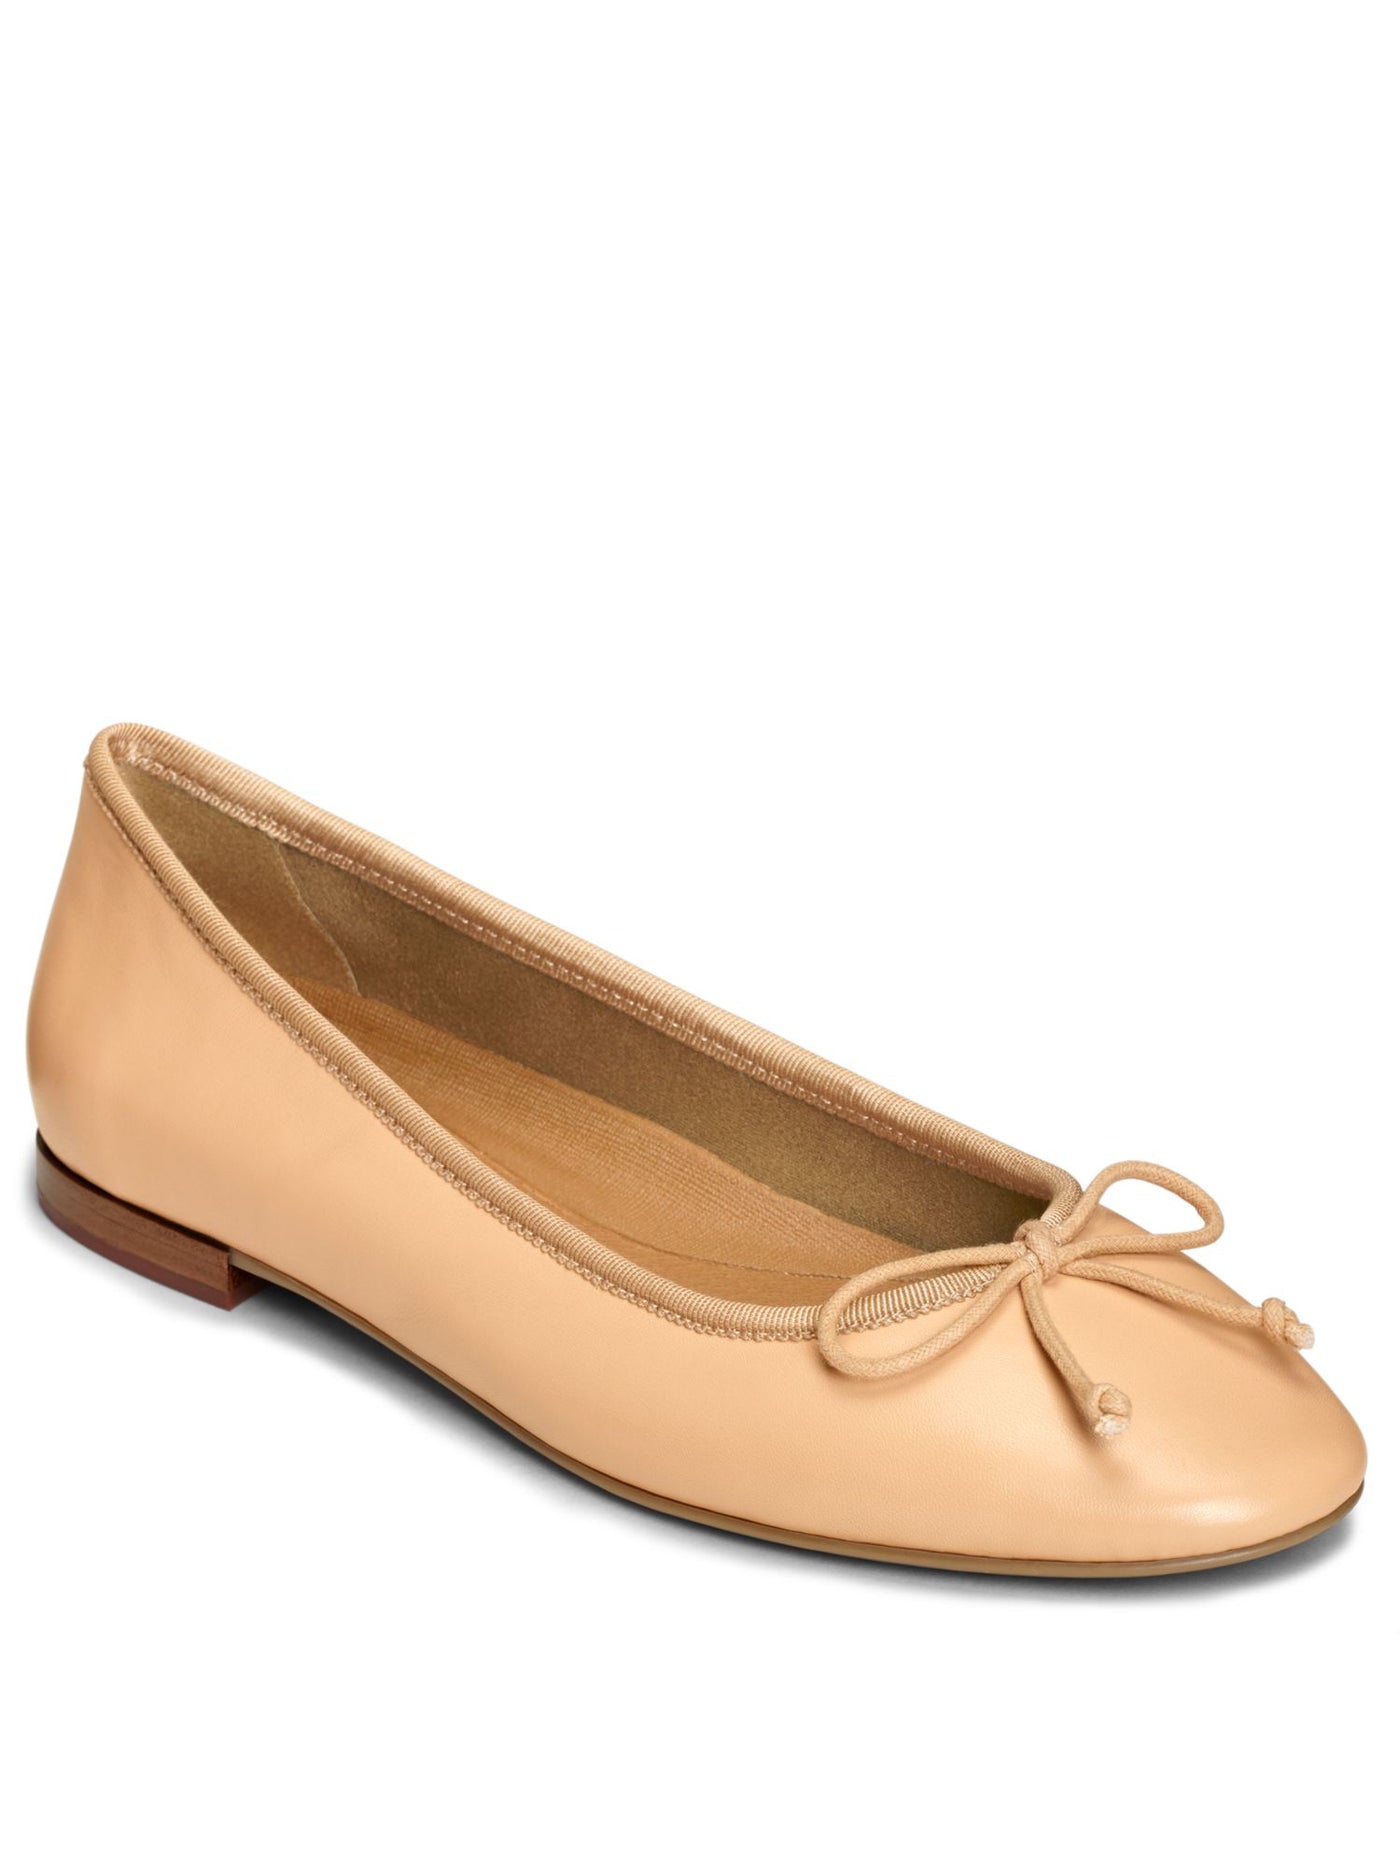 AEROSOLES Womens Nude Beige Cushioned Bow Accent Homerun Round Toe Slip On Leather Ballet Flats 10.5